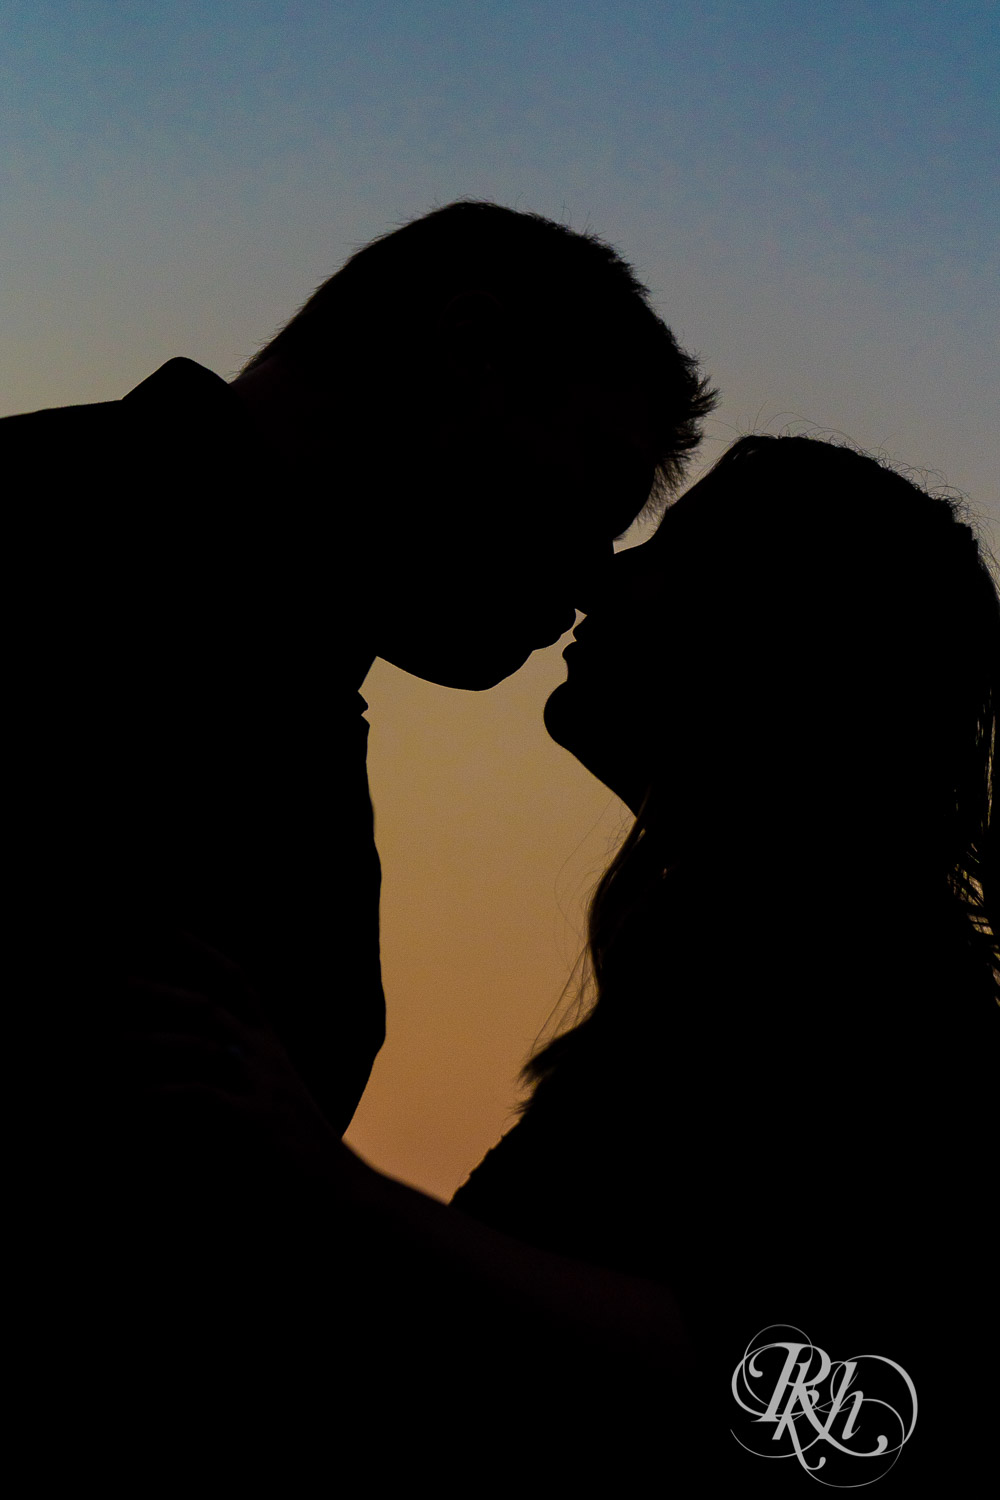 Man and woman kissing in silhouette during sunset at Lebanon Hills Regional Park in Eagan, Minnesota.